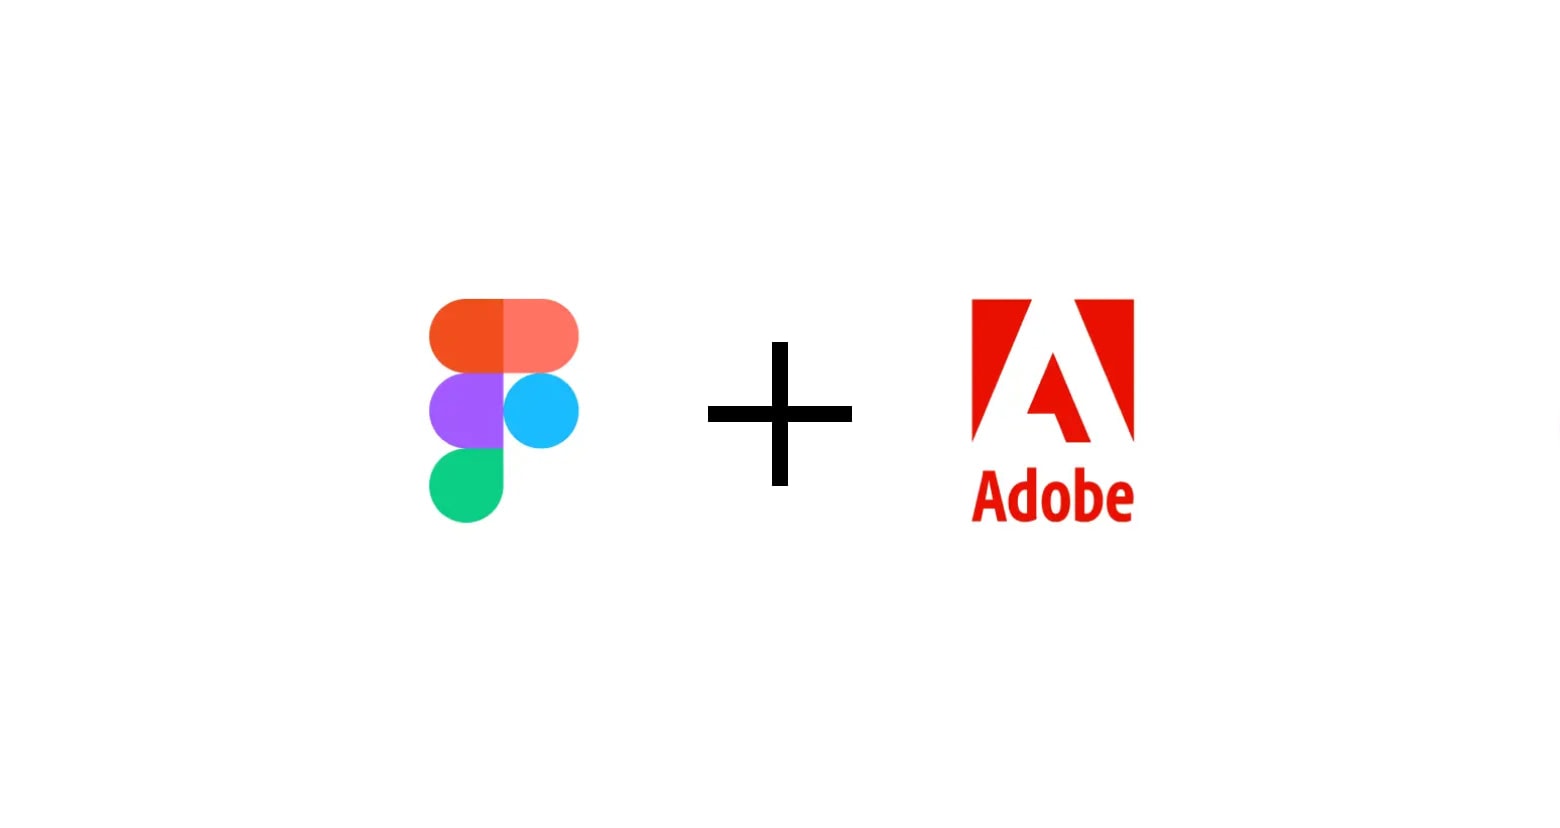 Figma was acquired by Adobe